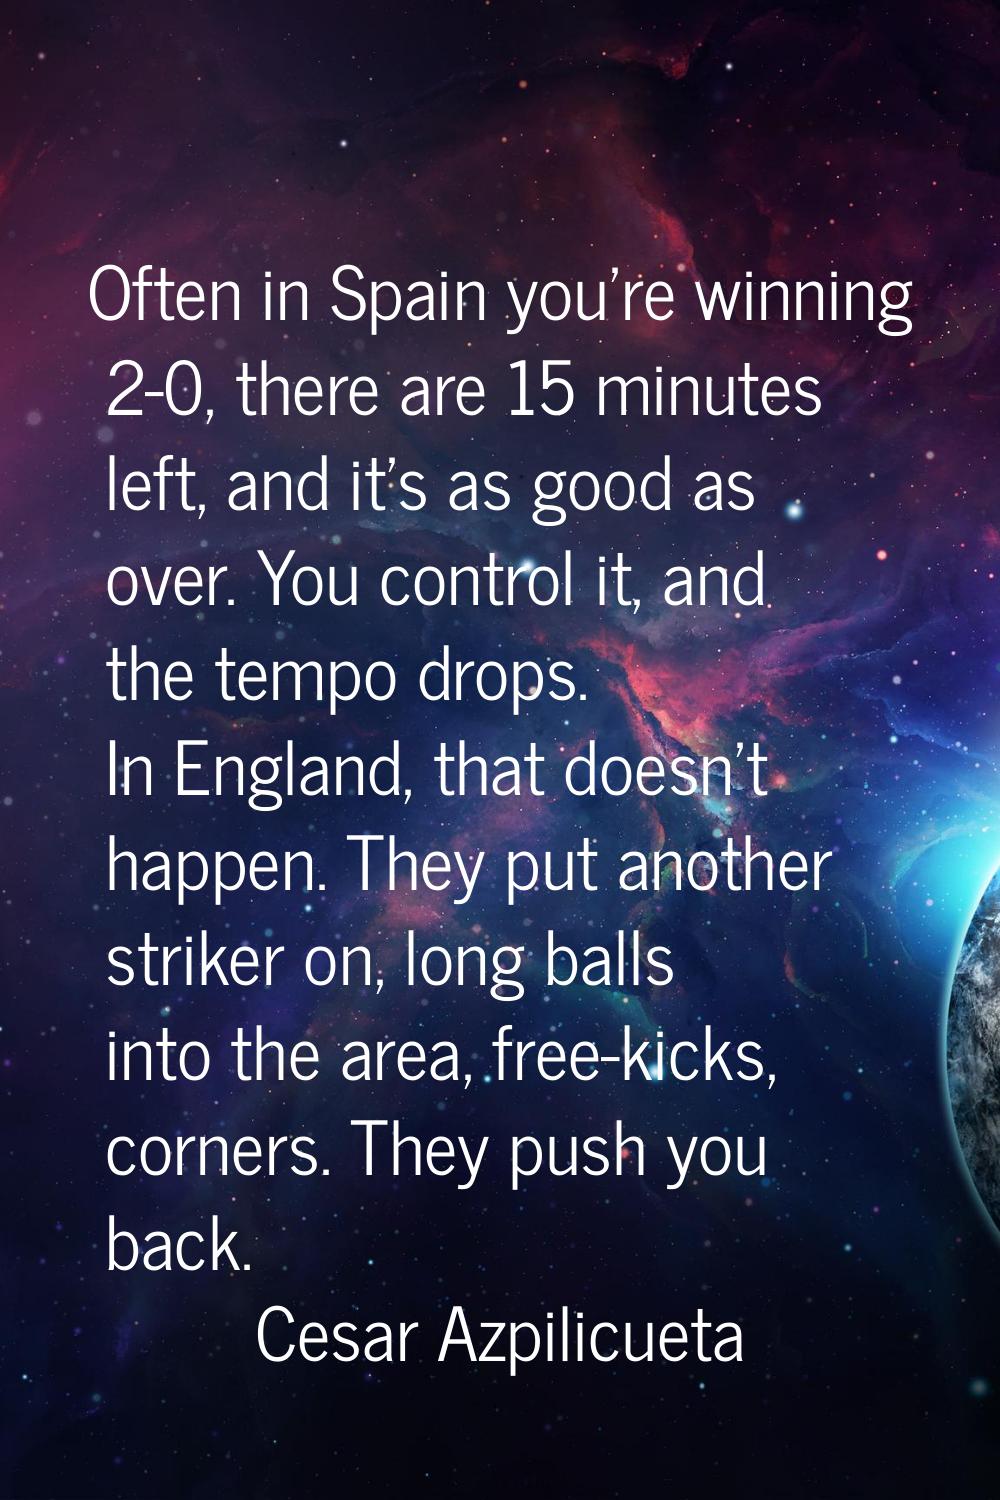 Often in Spain you're winning 2-0, there are 15 minutes left, and it's as good as over. You control